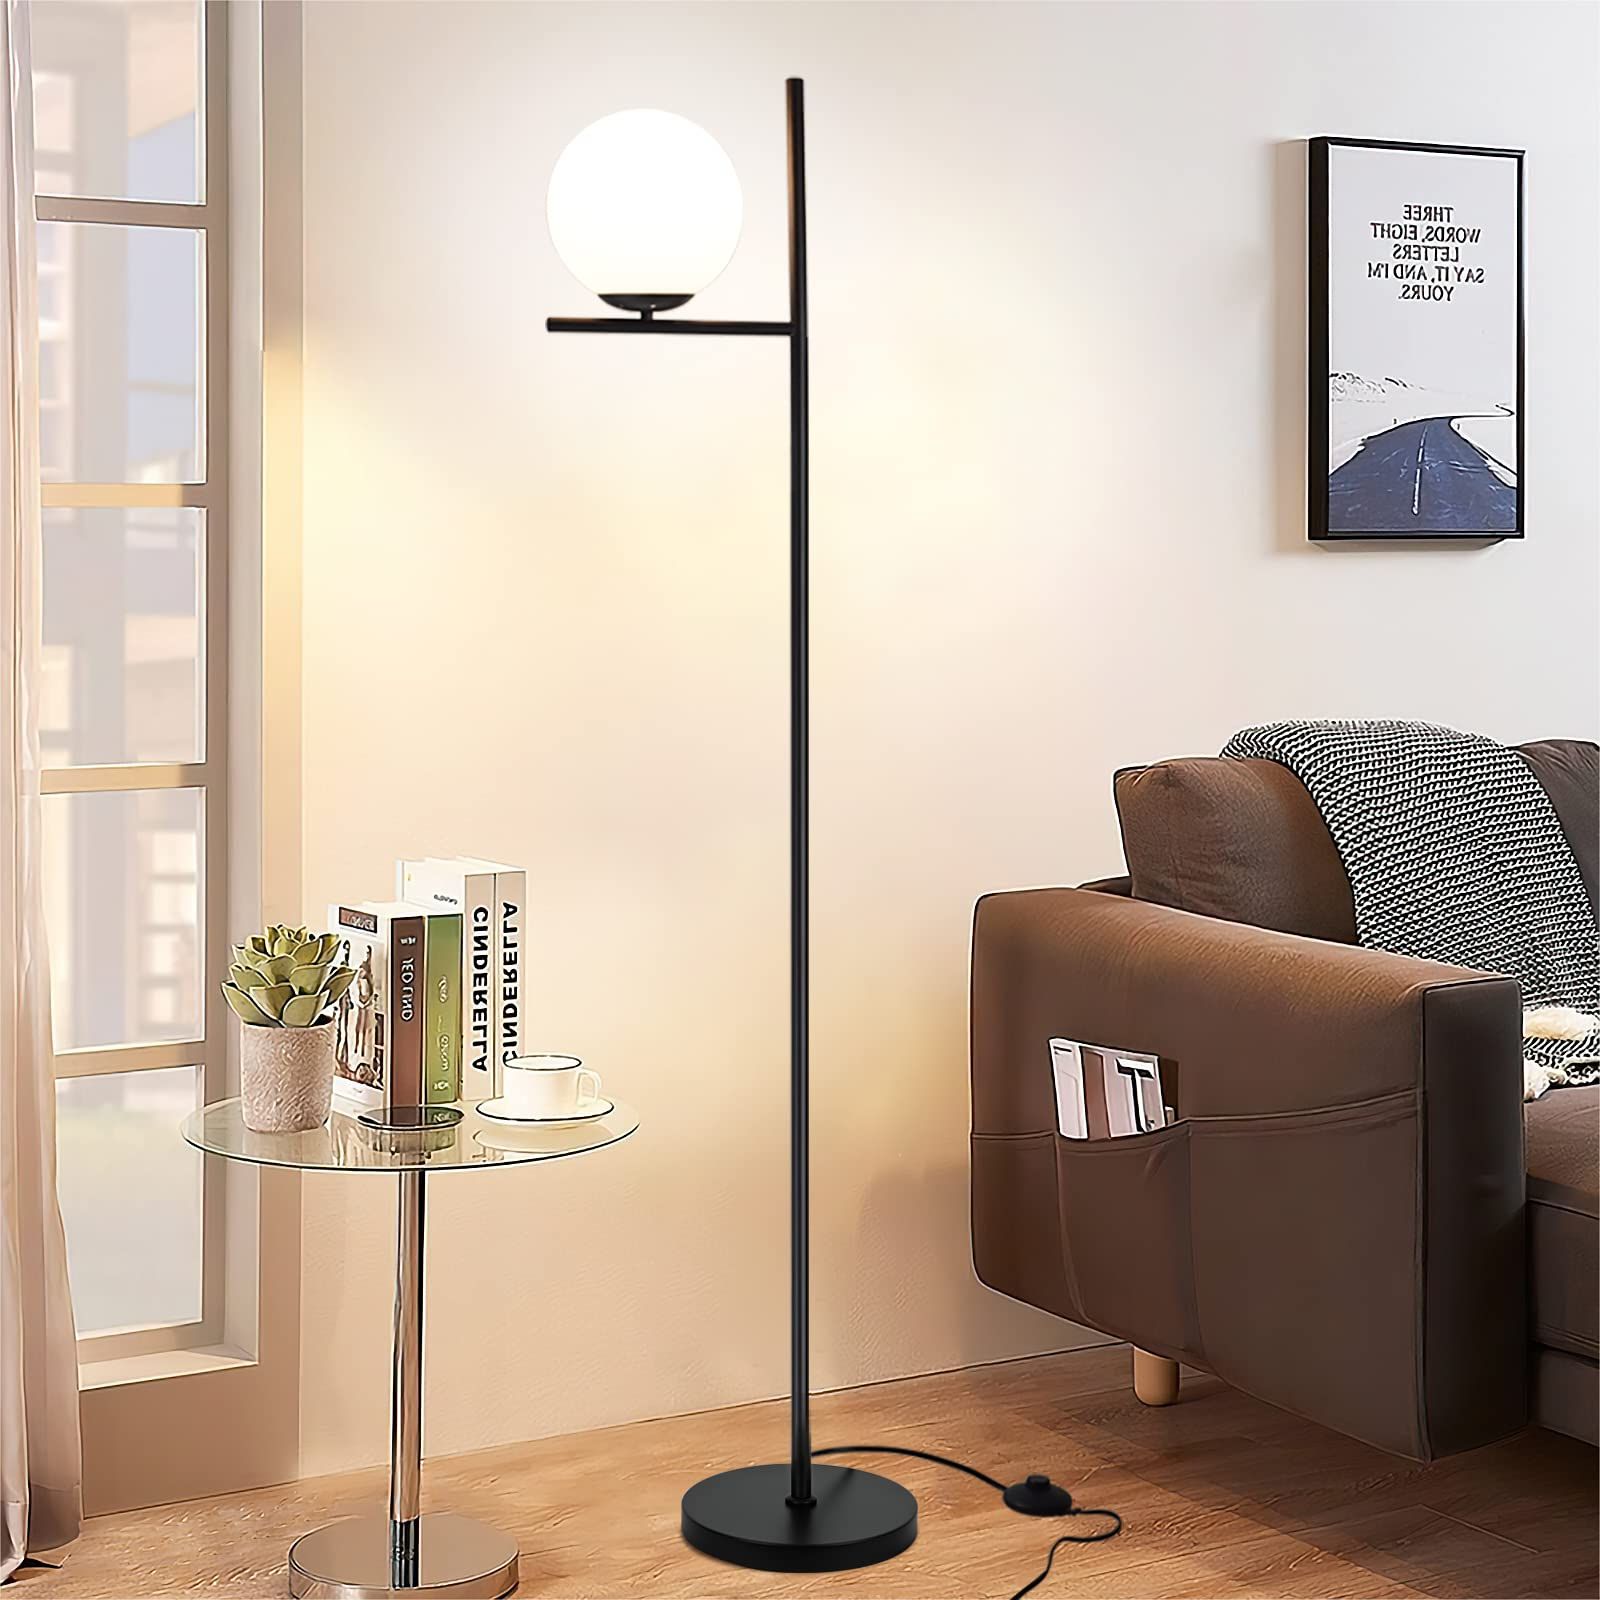 Famous Globe Standing Lamps Throughout Dllt Modern Led Sphere Floor Lamp 9w Frosted Glass Globe Standing Lamps For  Bedroom, Energy Saving Mid Century Tall Pole Standing Accent Lighting For  Living Room, Office, Bedroom, Black – – Amazon (View 9 of 15)